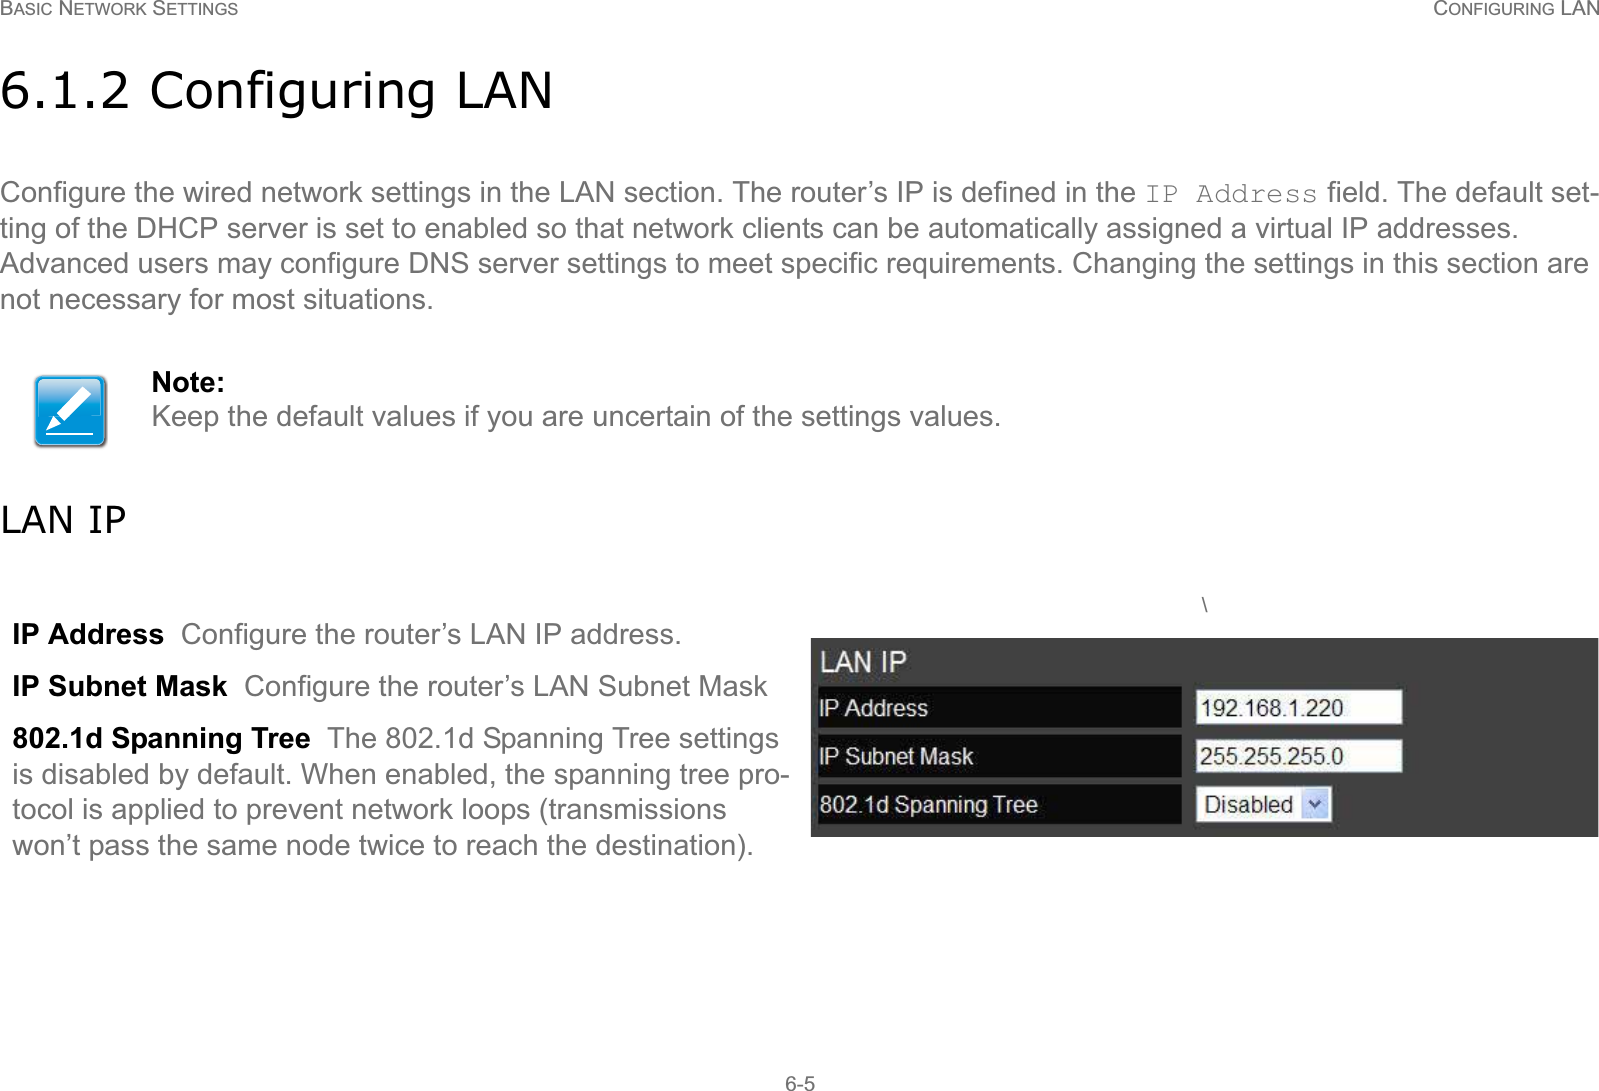 BASIC NETWORK SETTINGS CONFIGURING LAN6-56.1.2 Configuring LANConfigure the wired network settings in the LAN section. The router’s IP is defined in the IP Address field. The default set-ting of the DHCP server is set to enabled so that network clients can be automatically assigned a virtual IP addresses. Advanced users may configure DNS server settings to meet specific requirements. Changing the settings in this section are not necessary for most situations.LAN IPNote:Keep the default values if you are uncertain of the settings values.IP Address  Configure the router’s LAN IP address.IP Subnet Mask  Configure the router’s LAN Subnet Mask802.1d Spanning Tree  The 802.1d Spanning Tree settings is disabled by default. When enabled, the spanning tree pro-tocol is applied to prevent network loops (transmissions won’t pass the same node twice to reach the destination). \